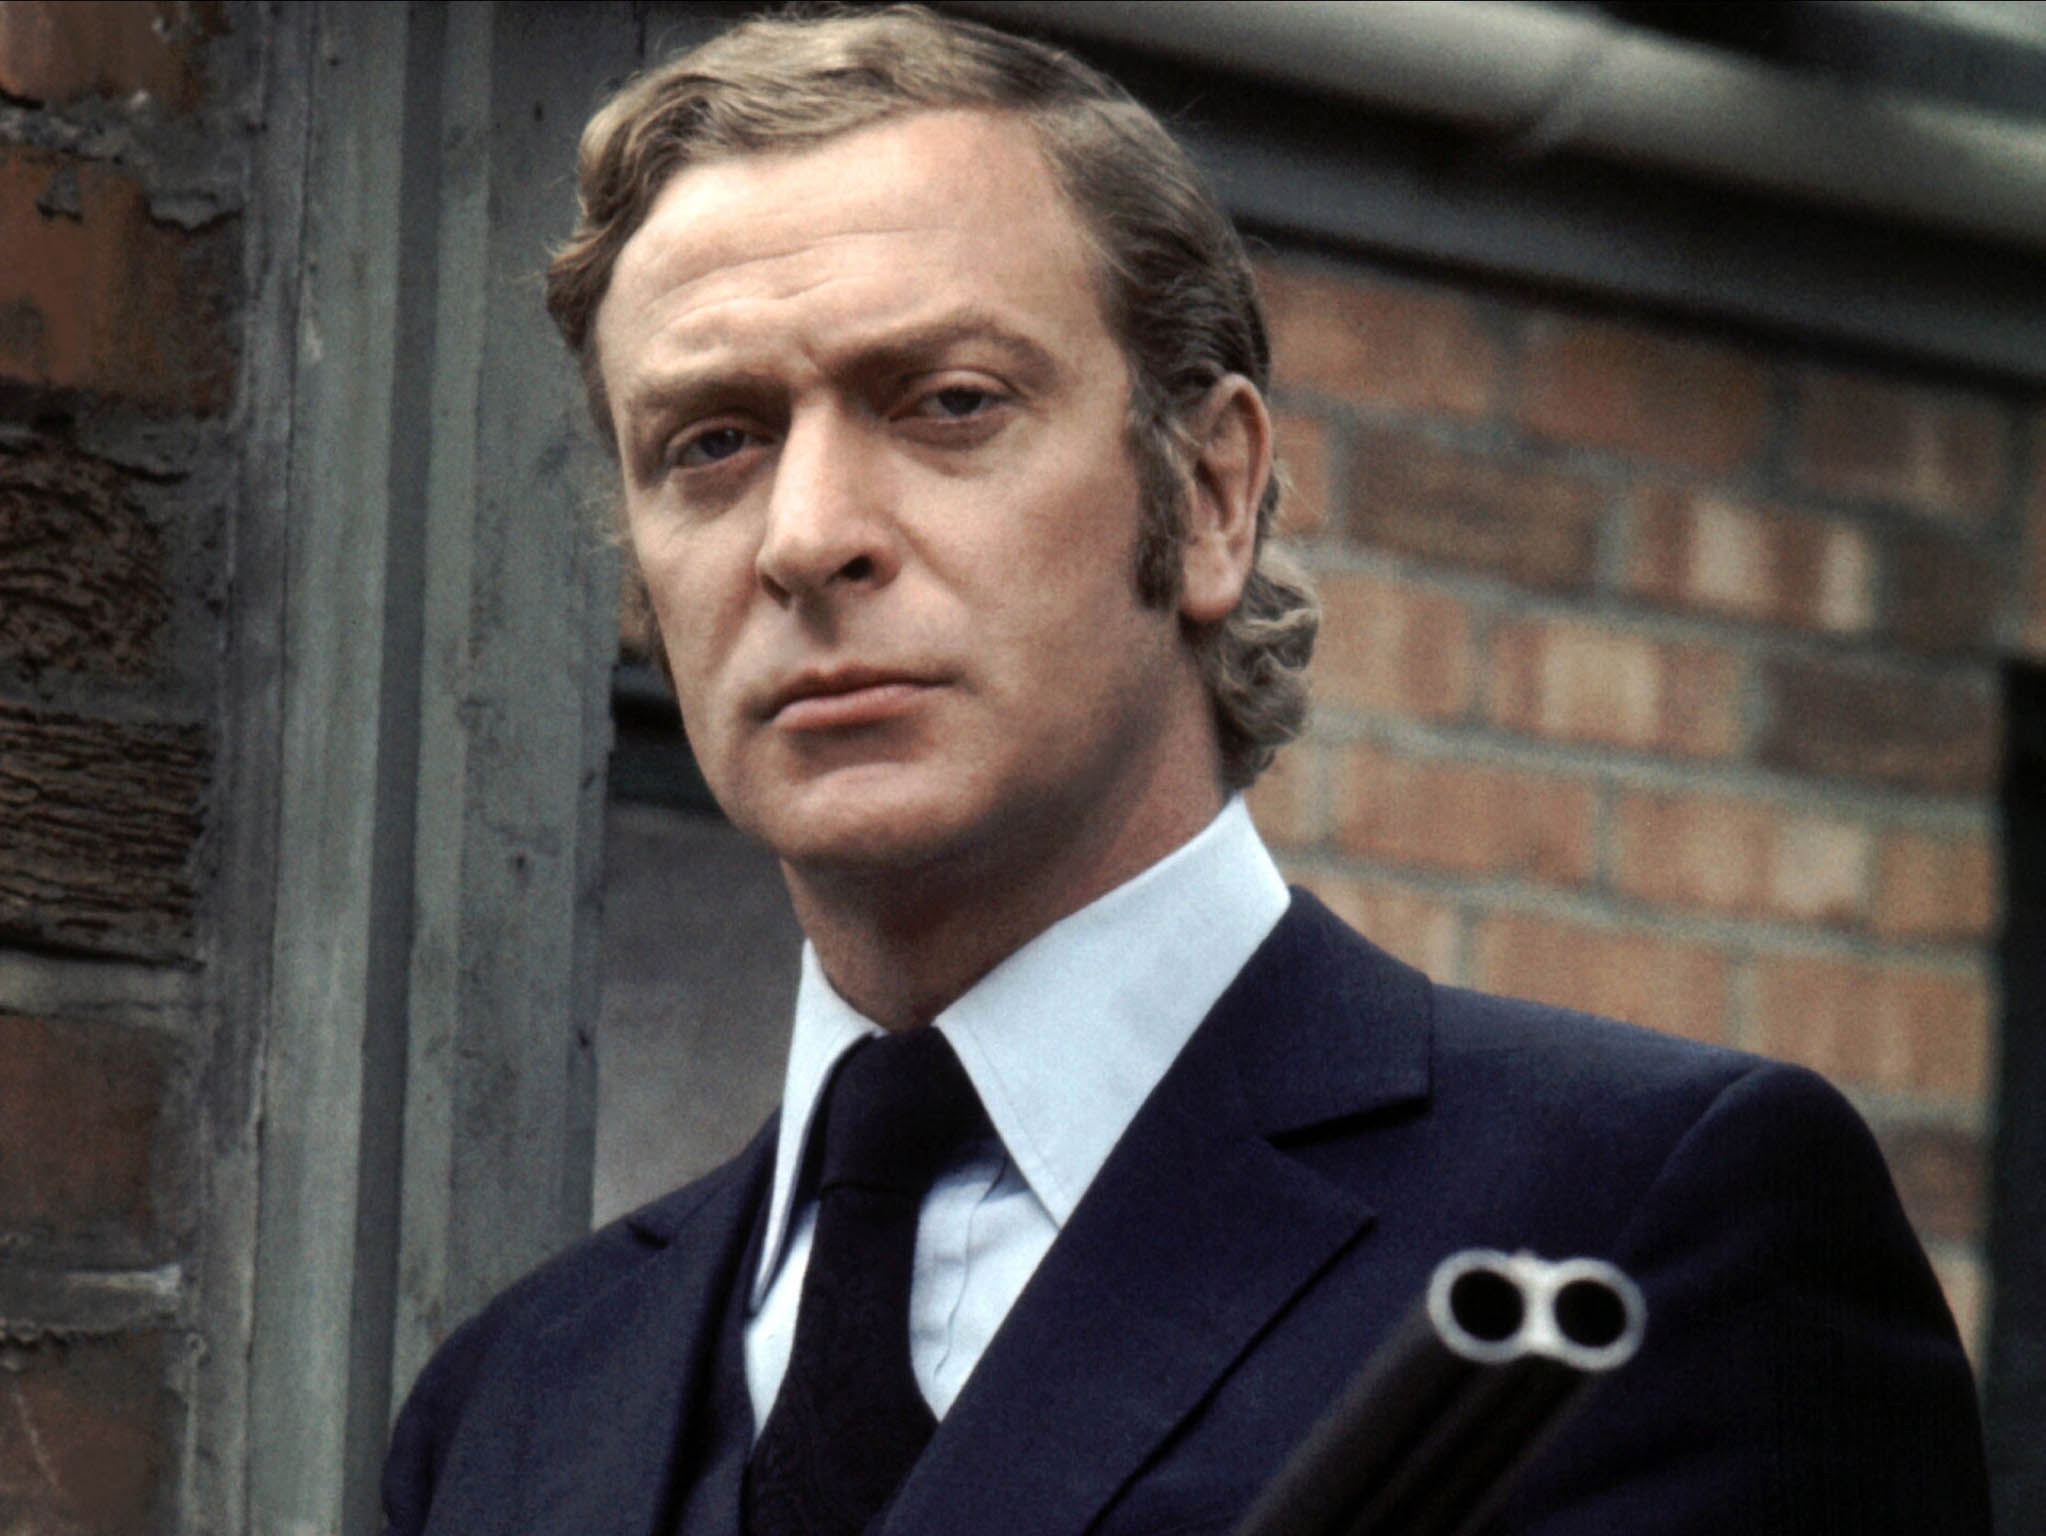 Michael Caine in the 1971 film Get Carter